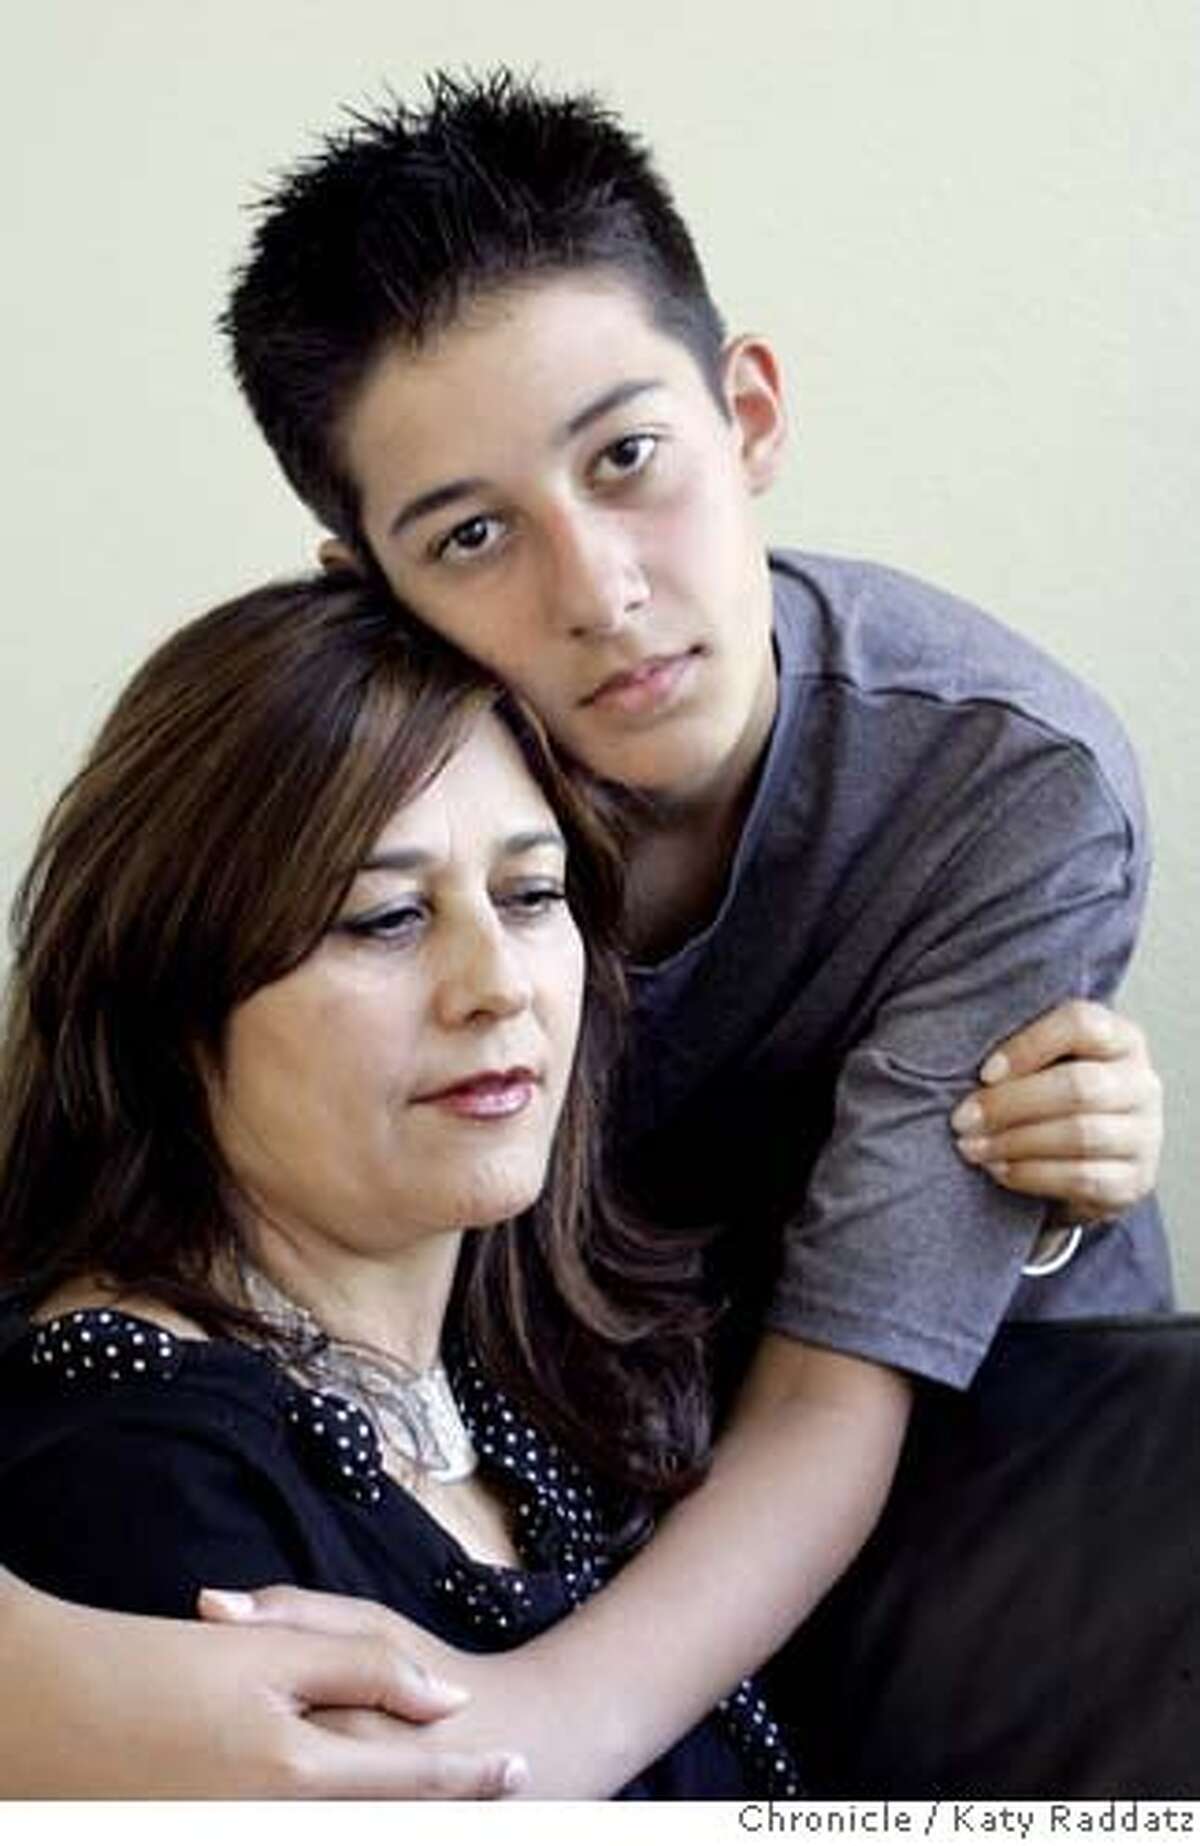 911KIDSB_058_RAD.jpg SHOWN: Wali Ghiassy, age 13, and his mother, Sohaila Azimi, who works with the Afghan Coalition as a health navigator. Story is about how 9/11 has shaped the world of kids. These photos made in Fremont, CA. on Thursday, August 10, 2006. (Katy Raddatz/The S.F.Chronicle) **Wali Ghiassy, Sohaila Azimi Mandatory credit for photographer and the San Francisco Chronicle/ -Mags out